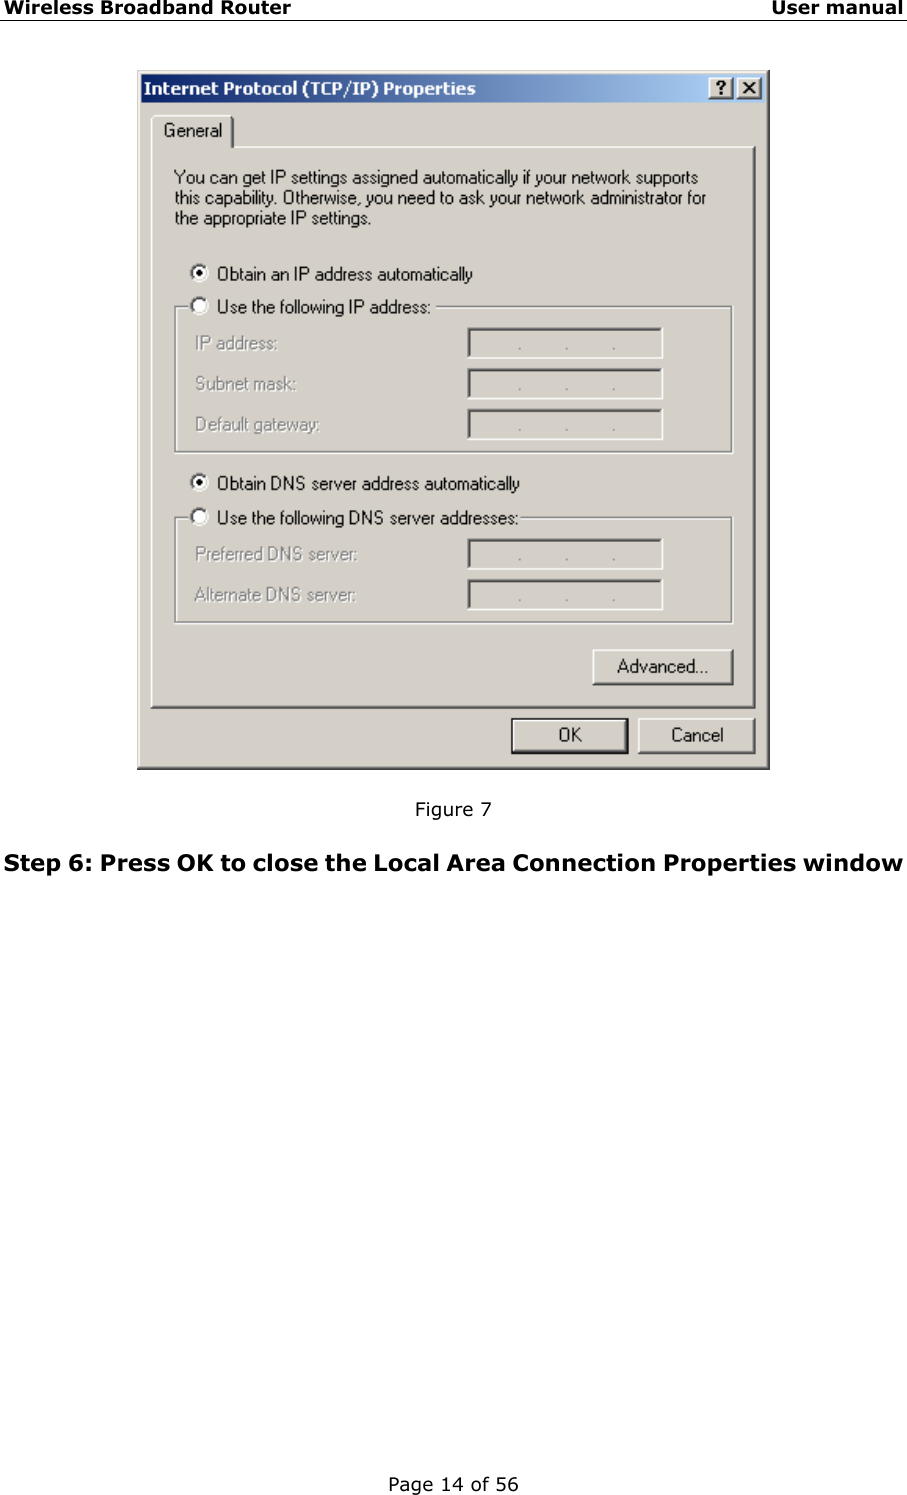 Wireless Broadband Router                                                   User manual Page 14 of 56   Figure 7  Step 6: Press OK to close the Local Area Connection Properties window 